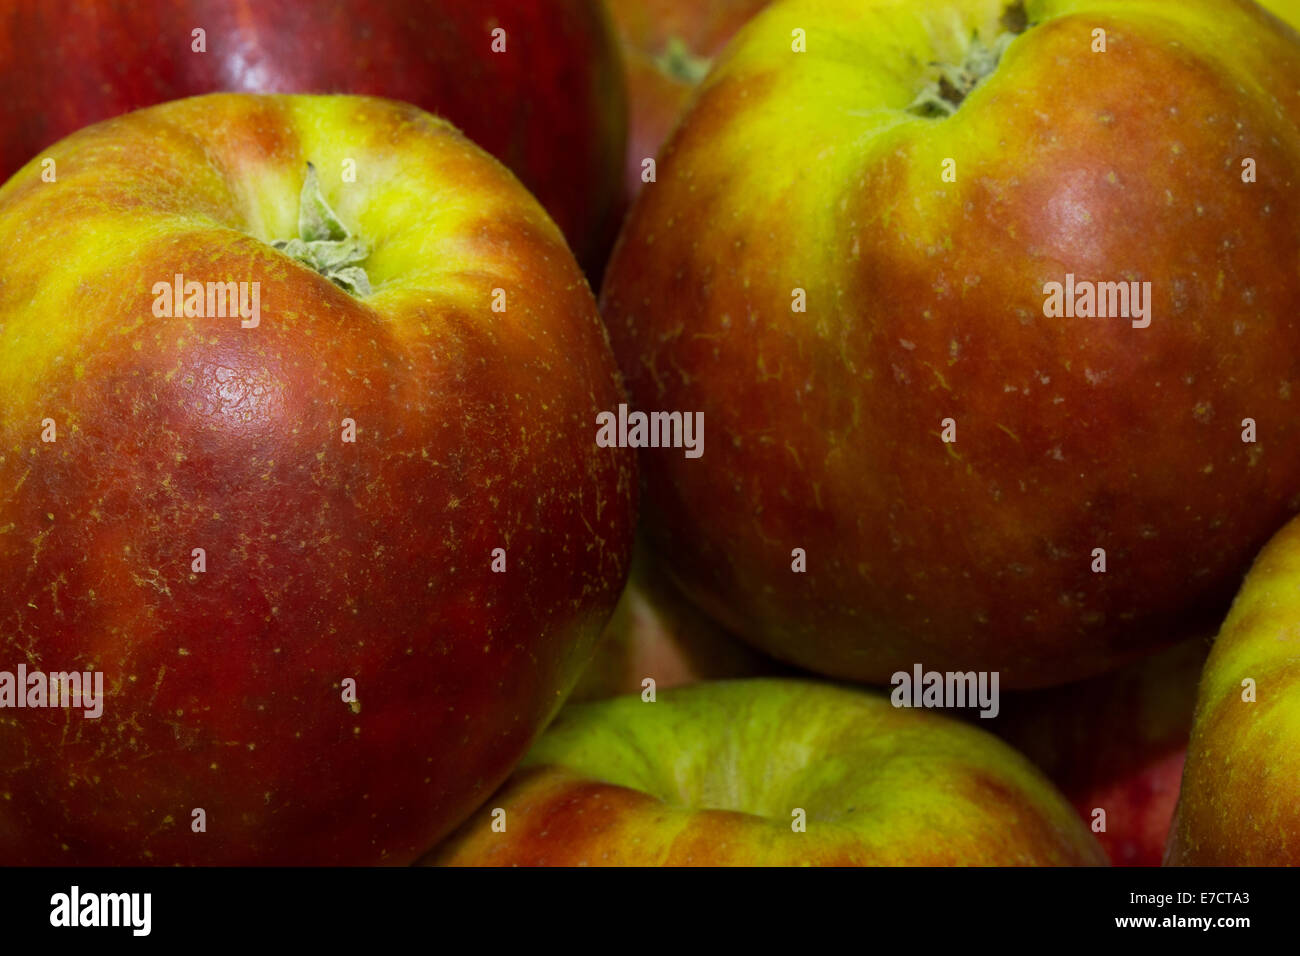 Red Gravenstein apples variety. Cooking apple, especially for apple sauce and apple cider. Stock Photo